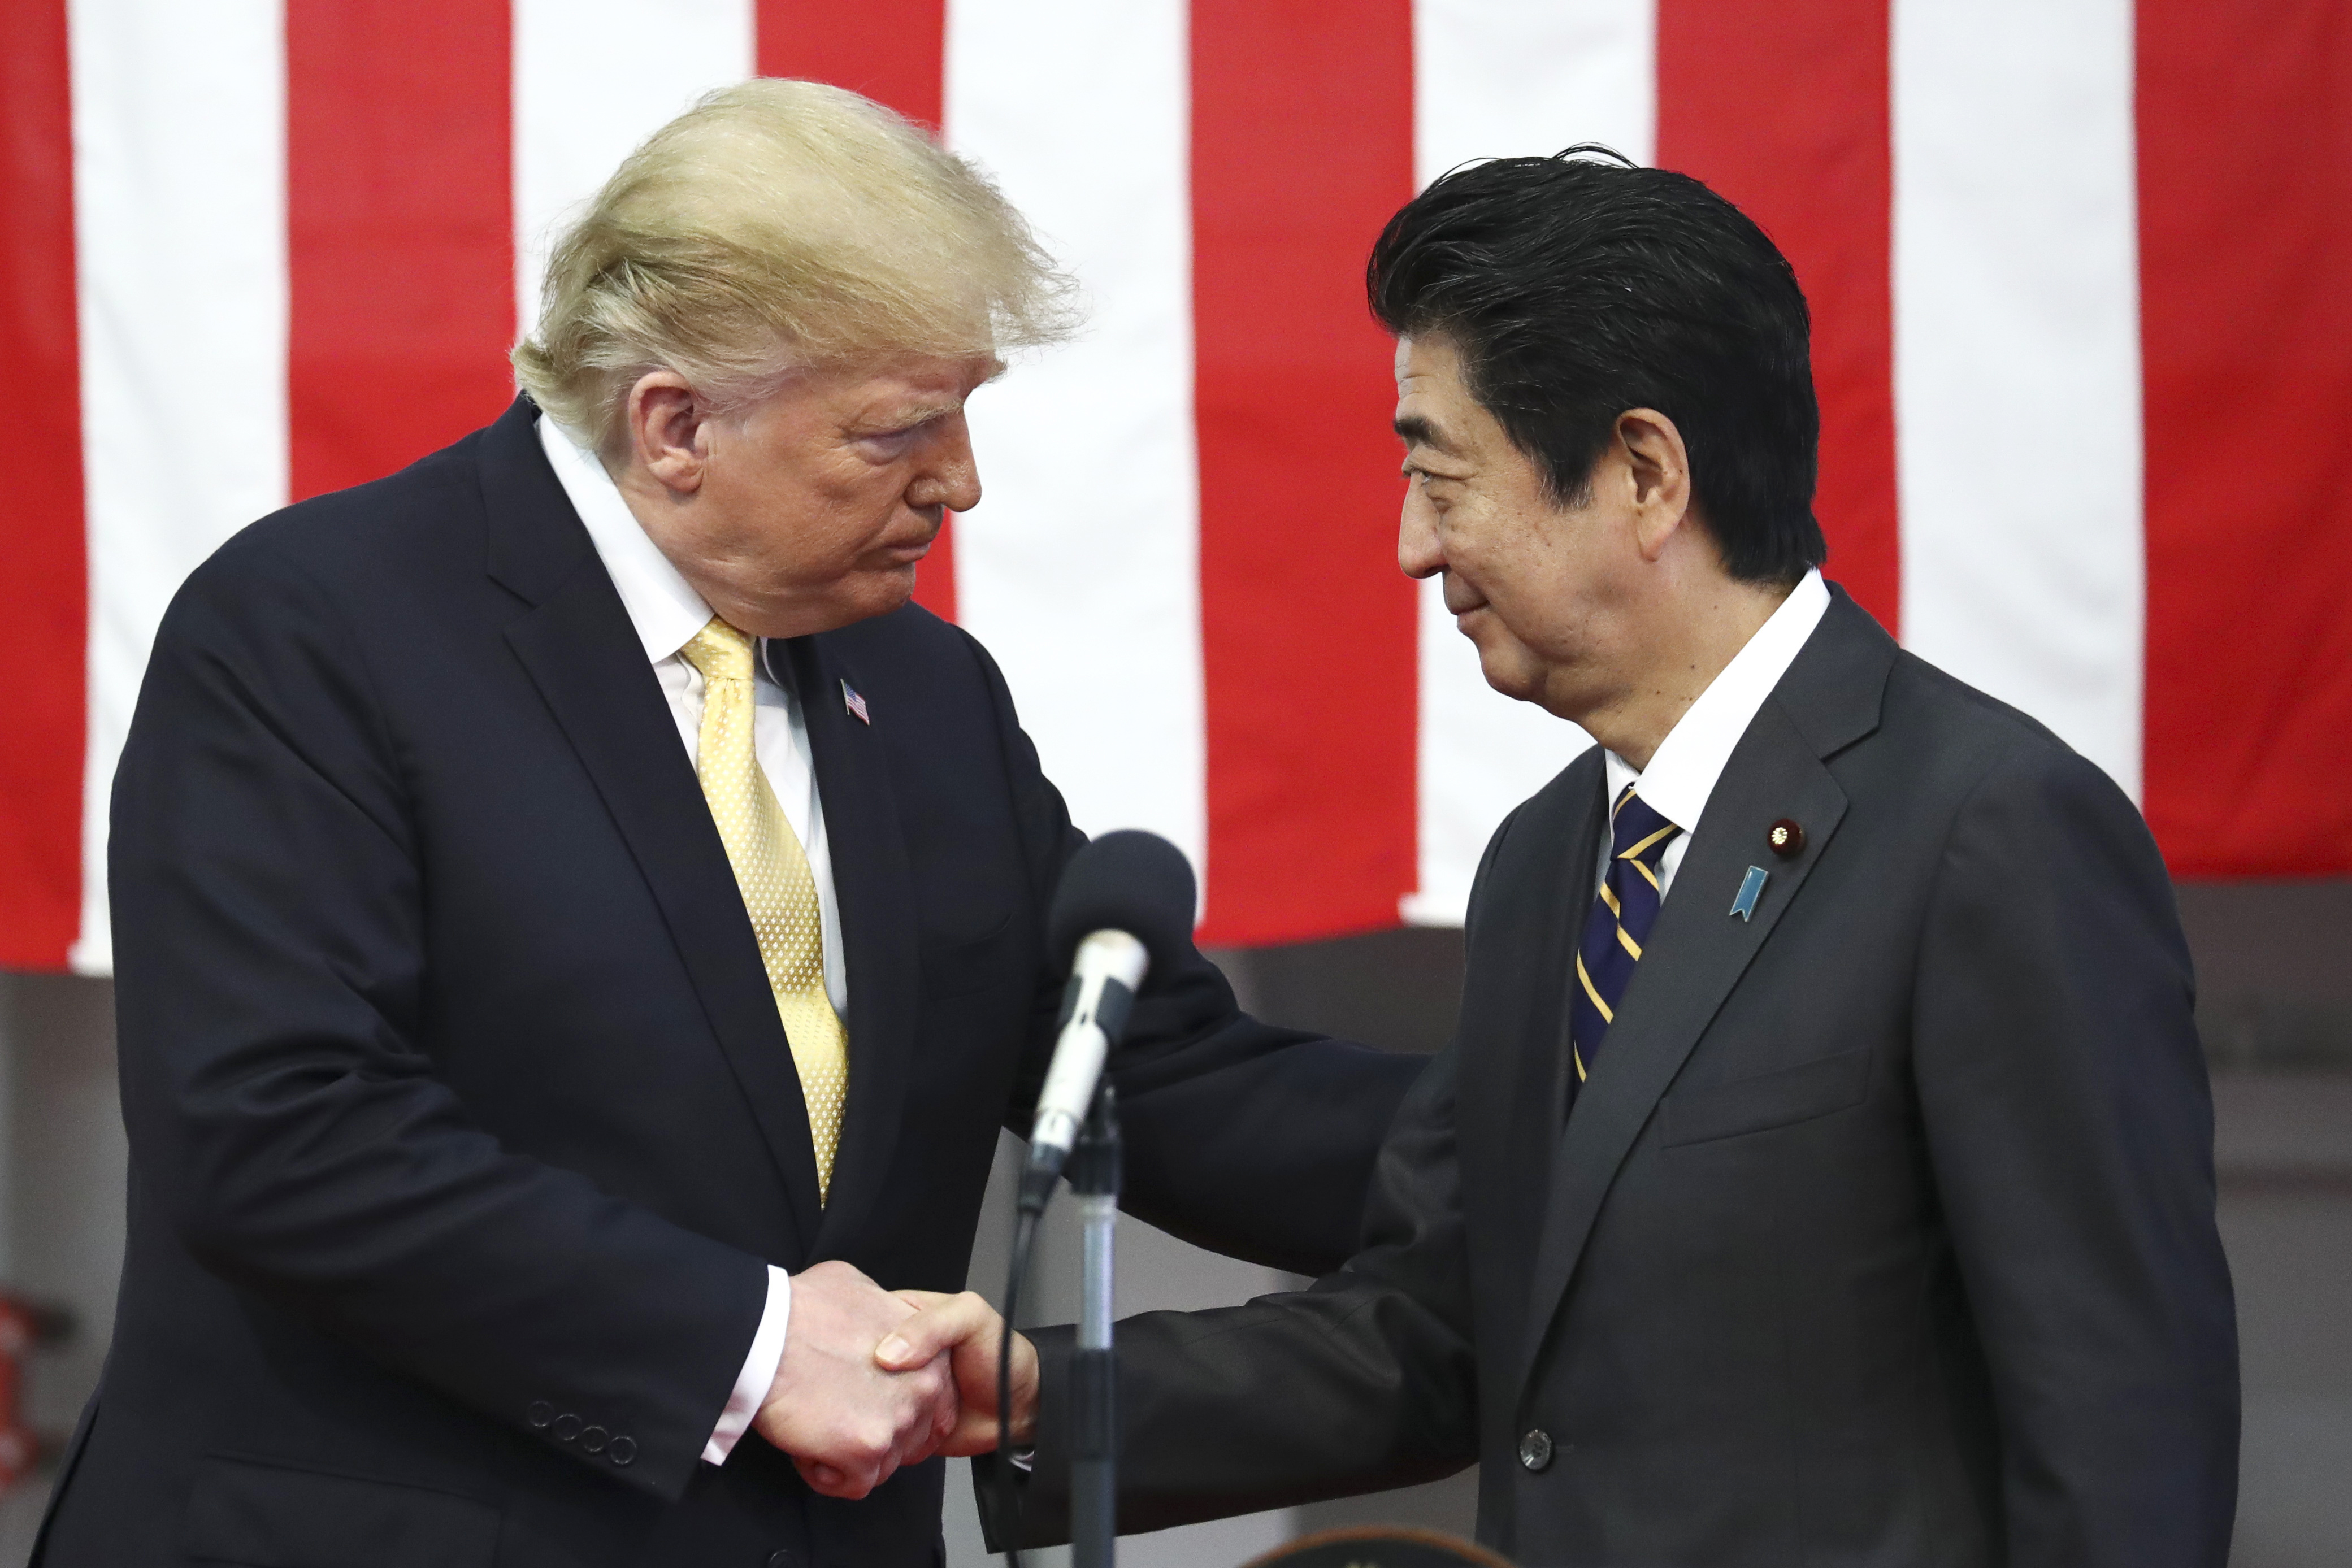 U.S. President Donald Trump, left, shakes hands with Japan's Prime Minister Shinzo Abe during delivering a speech to Japanese and U.S. troops as they aboard Japan Maritime Self-Defense Force's (JMSDF) helicopter carrier DDH-184 Kaga at JMSDF Yokosuka base in Yokosuka, south of Tokyo, Tuesday, May 28, 2019. (Athit Perawongmetha/Pool Photo vi AP)